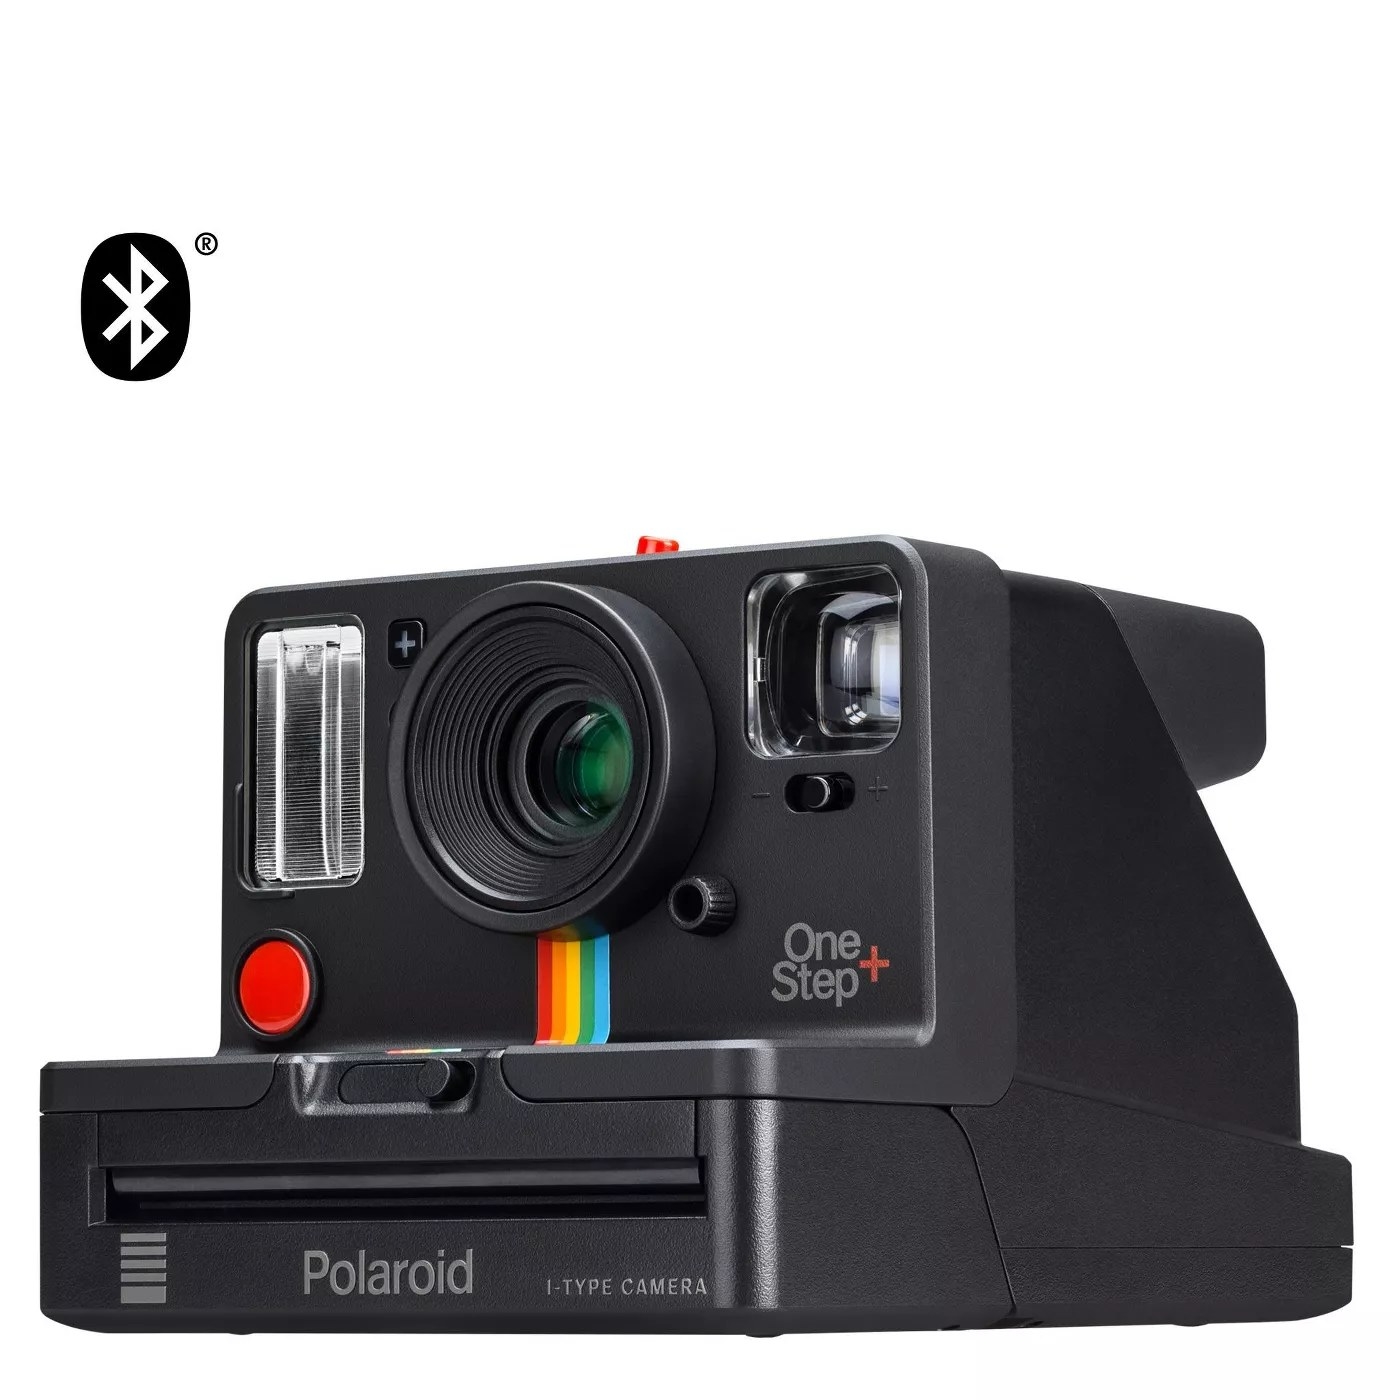 The black camera says &quot;Polaroid&quot; and &quot;OneStep+&quot; with rainbow stripes connecting the lens to the body of the camera